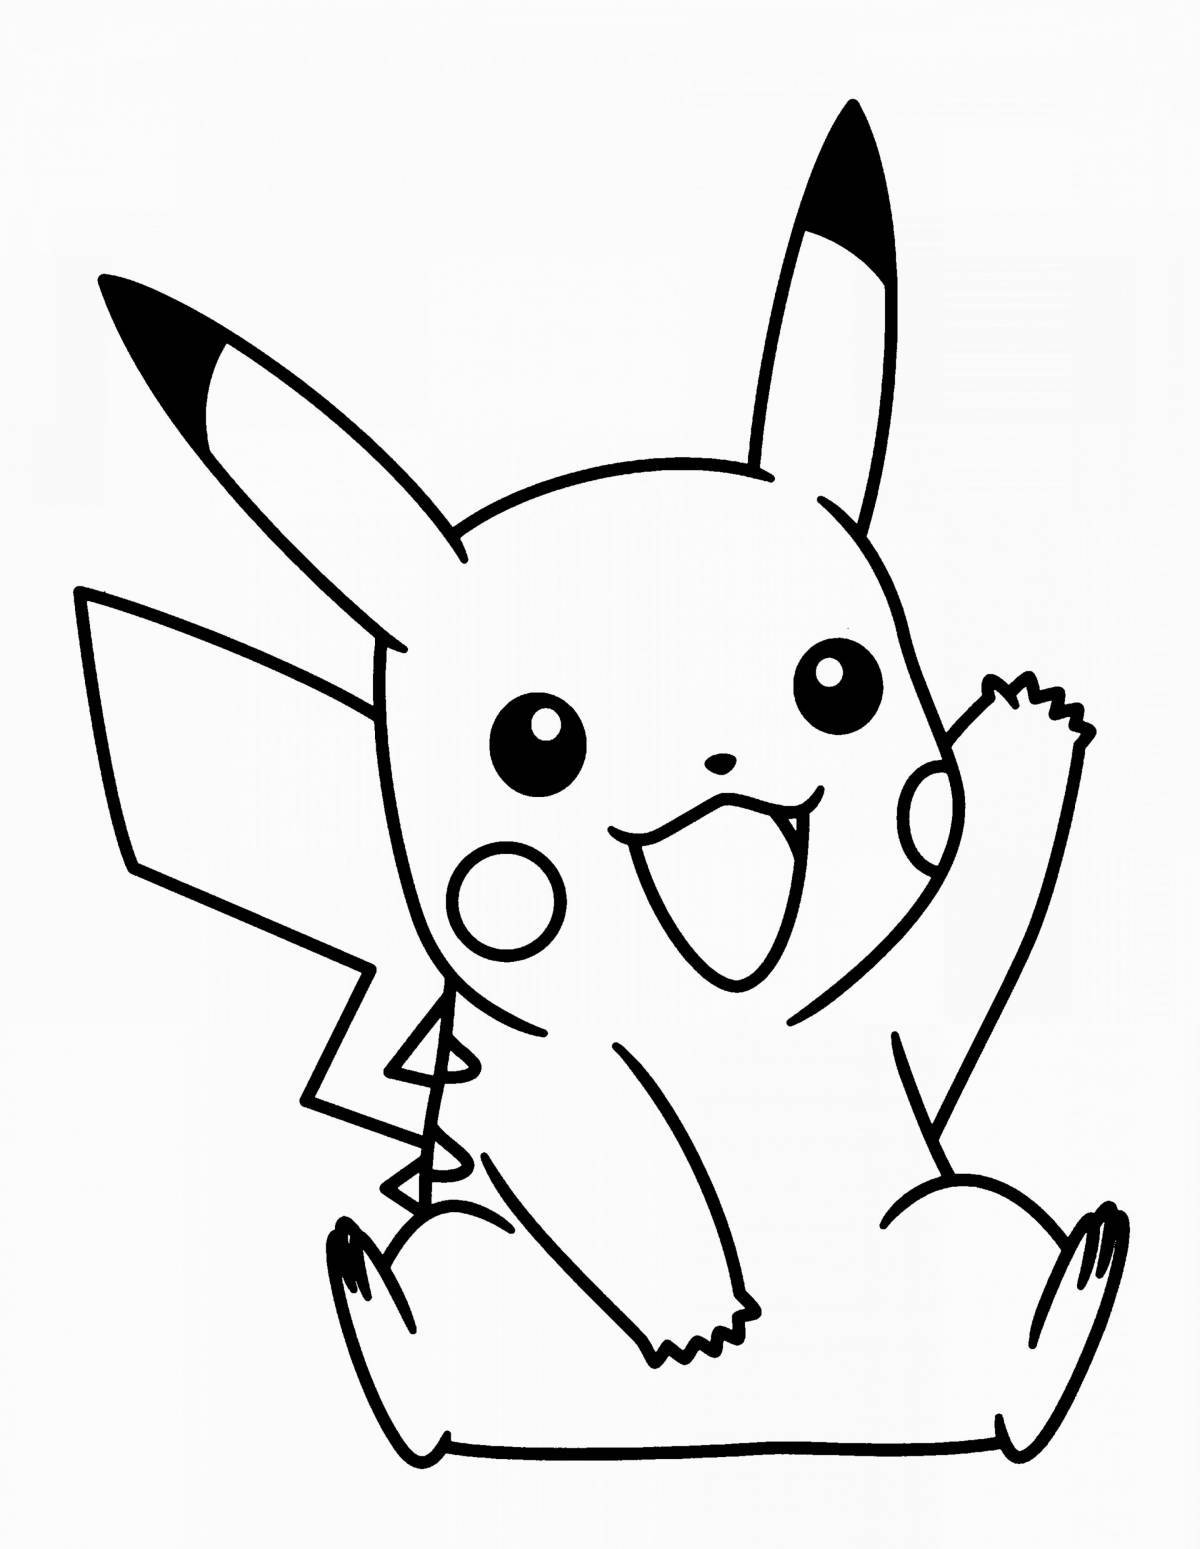 Colorful pikachu coloring page for kids